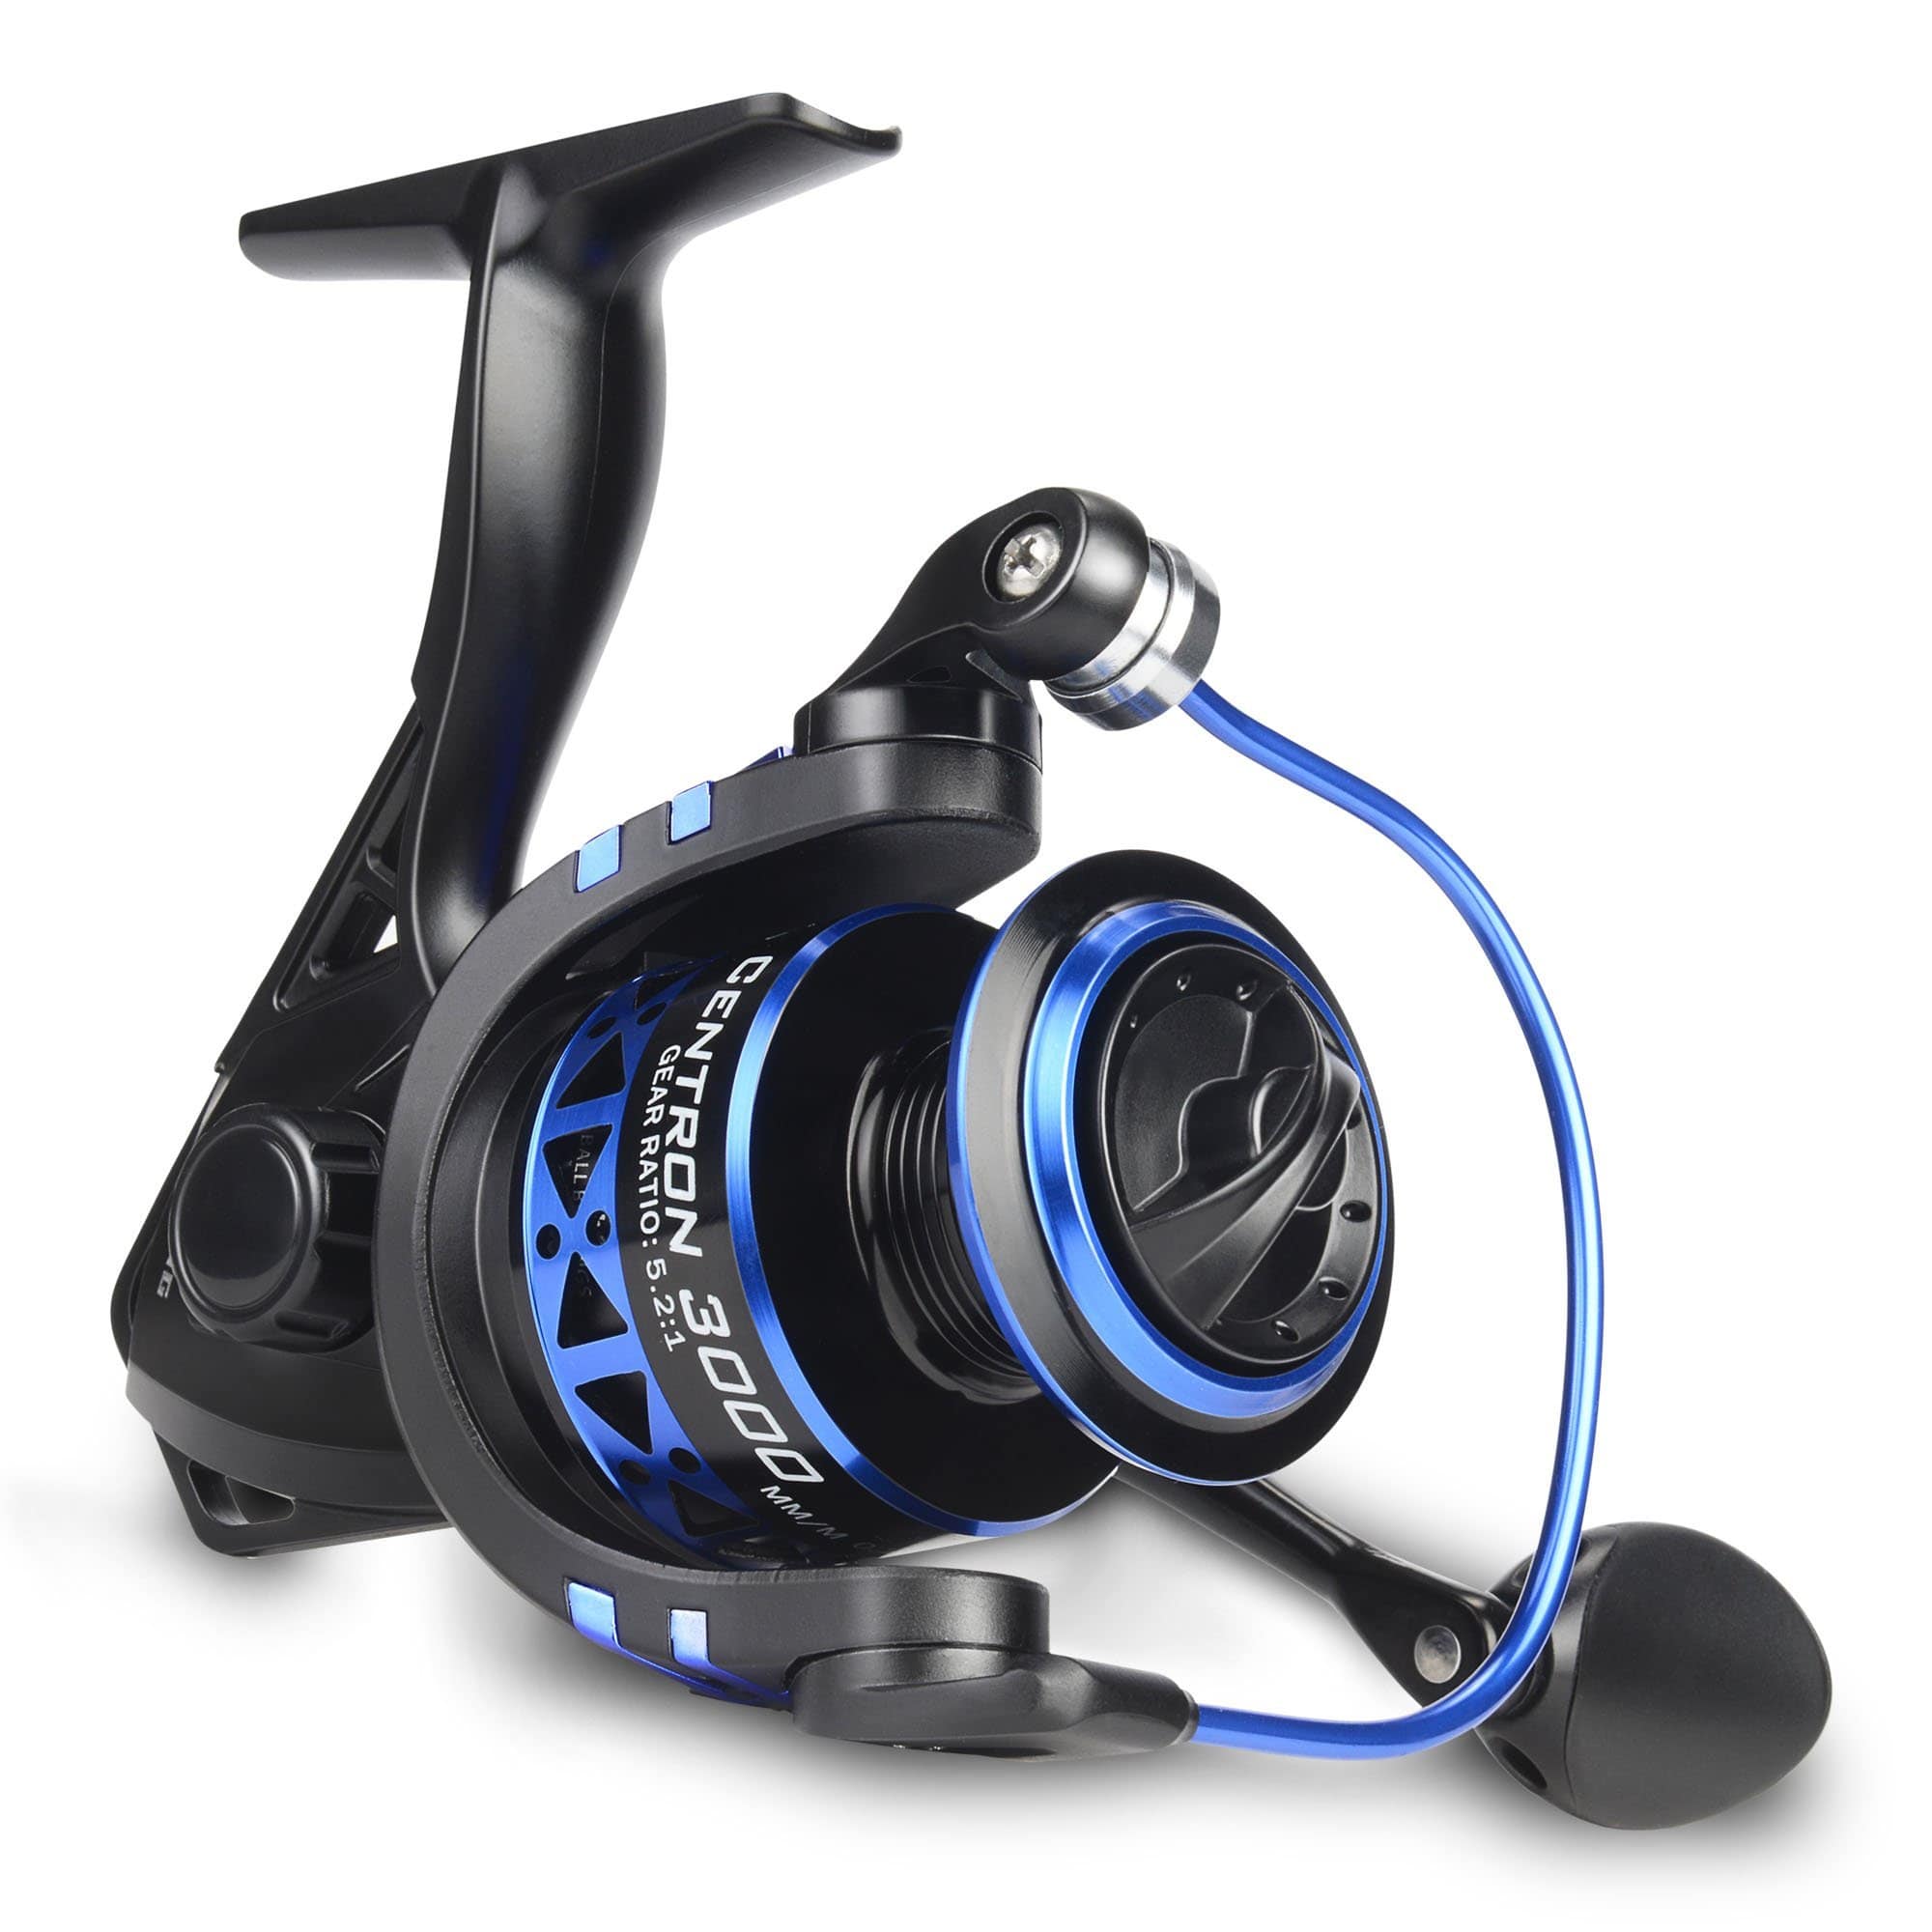 KastKing Centron: An Afforadable, Top End Fishing Combo! REVIEW